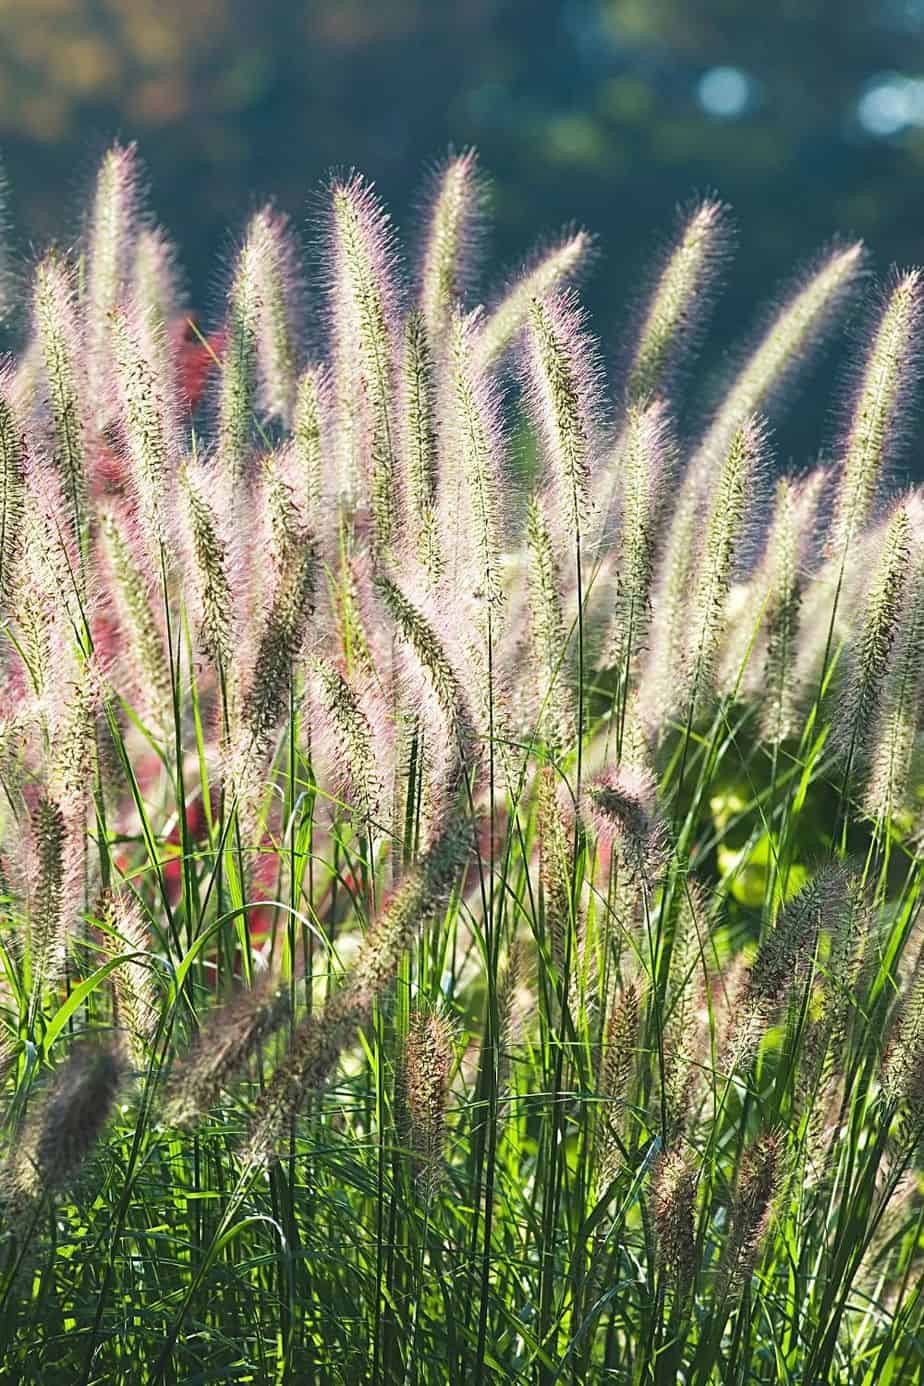 Fountain Grass is a lovely decorative grass you can grow for privacy